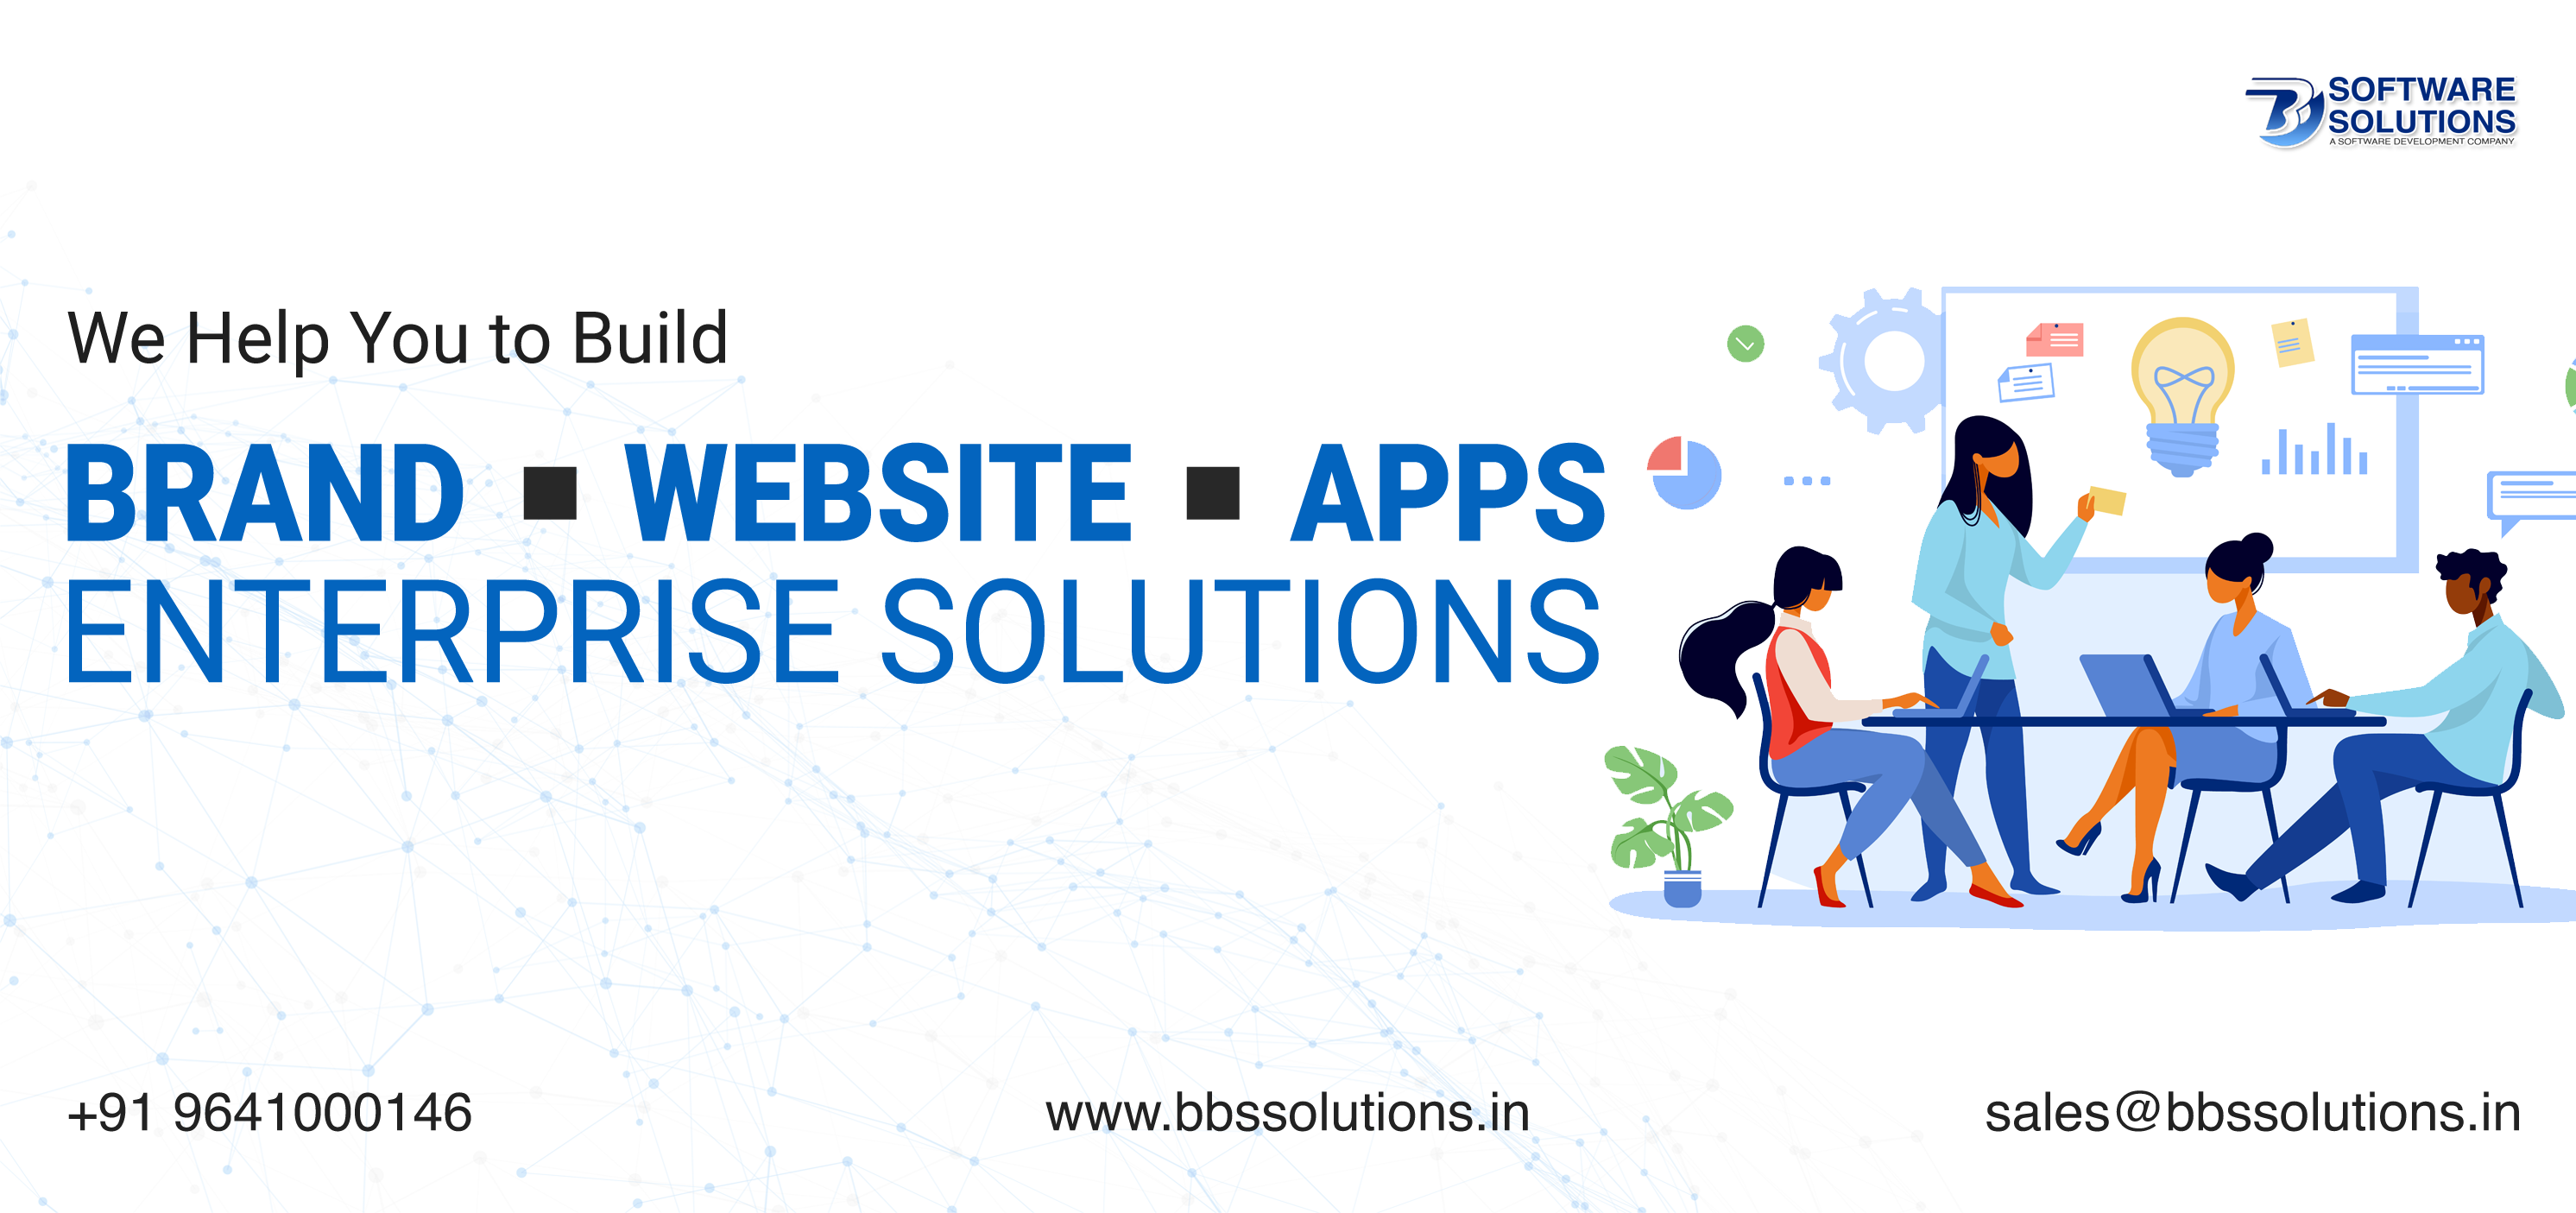 We work differently to make difference , Go Digital with us  ,Business Boost Software Solutions do Best Software ,Web Development,Mobile App solutions provider in siliguri , india, WestBengal , Assam , Siliguri , Jalpaiguri ,Dhupguri,
    Best website designing in Siliguri with affordable packages and quick support. Get effective website design in Siliguri from best website designers. #bbssolutions , #SEO  , #DigitalMarketing  , #WebDesign  , #SoftwareDevelopment  , #FacebookAds  , #GoogleAds  , #GoogleSEO  , #WebsiteDesigning 
     , #Software  , #website  , #BusinessBoostSoftwareSolutions  , bbssolutions,SEO, Digital Marketing, WebDesign, Software Development, Facebook Ads, Google Ads, Google SEO, Website Designing, 
    Software, website, Business Boost Software Solutions, 9641000146,7478180650,best GST software in West bengal,Best GST software company in north bengal,GST solution in west bengal
    ,gst solutions in north bengal,best customize software in siliguri , india,best customize software in west bengal,best customize software in dhupguri,news portal website in west bengal
    ,news portal website in siliguri , india,regional news portal website in siliguri , india,school software in west bengal,school software in north bengal,school website in north bengal,
    school software in north bengal,android app, ios app, ecommerce website, ecommerce software,Web designing, website designing, ecommerce website, how to make website, create website, 
    website development company, web page design, seo, search engine optimization, seo siliguri , india , 
    seo company, best seo company, seo services, responsive web design, web designing companies, 
    how to create a website, internet marketing, digital marketing, online marketing, social media marketing, 
    promotion,web designing in Siliguri,web designing in Siliguri siliguri , india,web designing in siliguri , india,GST Software  ,  GST Billing Software  ,  GST Accounting  ,  GST Ready Software,
    software company in siliguri,software company in siliguri siliguri , india,software company in north east siliguri , india,
    school software in siliguri,school software in north east siliguri , india,customize software,free software demo,
    reasonable price software,cost effective software,resonable price software,free demo software,free software,best software support,free software support,best software company in siliguri , india,
    best software company in siliguri,MLM Software company in Siliguri,Binary Software company in Siliguri,
    top ten software company in north bengal,top ten software company in siliguri,top ten software company in siliguri , india,
    top ten software company in north east,software development siliguri , india,west bengal,kolkata,siliguri , software company in siliguri , india
     , software development west bengal , Customized software siliguri , india , software for hotel,medicine distributors,
    jewellery shop , best software company in siliguri,jalpaiguri,sikkim,darjeeling  , Business Boost Softwate Solutions  ,  
    Web designing company in siliguri  ,  ecommerce designing company in siliguri  ,  web development company in siliguri  ,  
    software development comapny in siliguri  ,  software development in sikkim  ,  website designing company in sikkim  ,  
    SEO service in sikkim  ,  web designing company in siliguri  ,  web designing compnay in North Bengal  ,  
    SEO service in siliguri  ,  web designing in north bengal  ,  web designing in north east siliguri , india , website designing in siliguri, best website designing in siliguri, web design, web designer in siliguri, web designing company siliguri